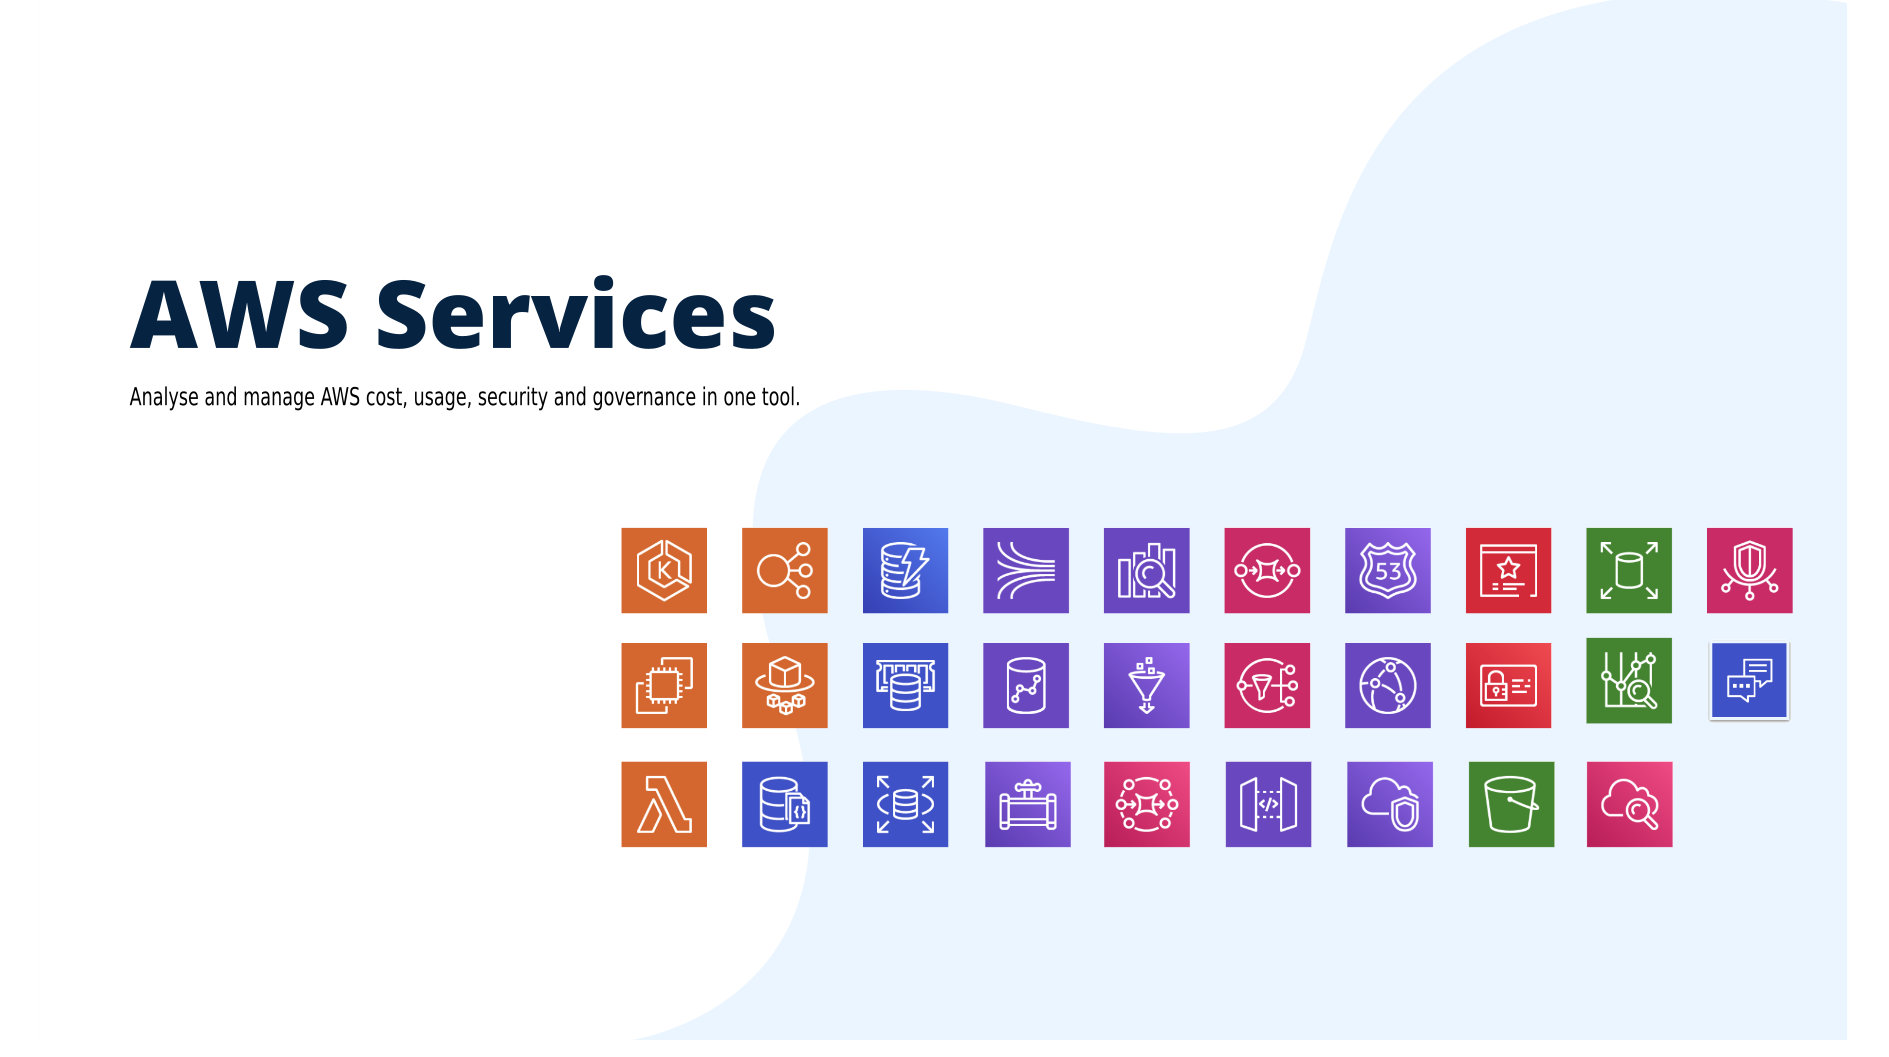 AWS Services supported by Komiser